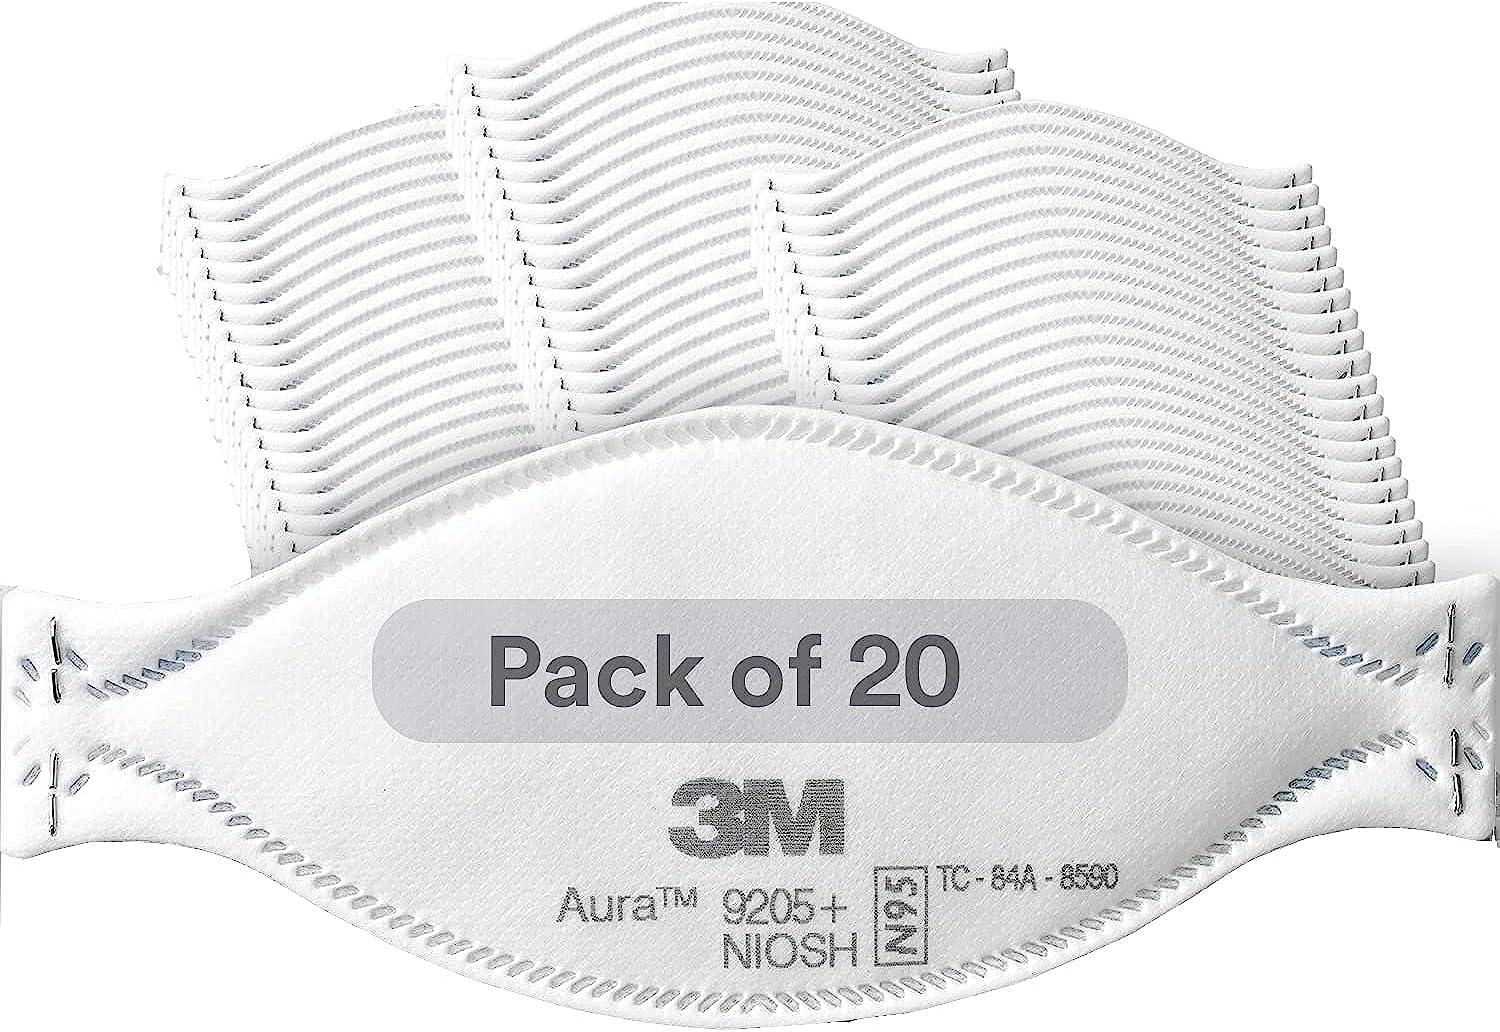 3M Aura N95 Foldable Particulate Respirators for $12.31 Shipped